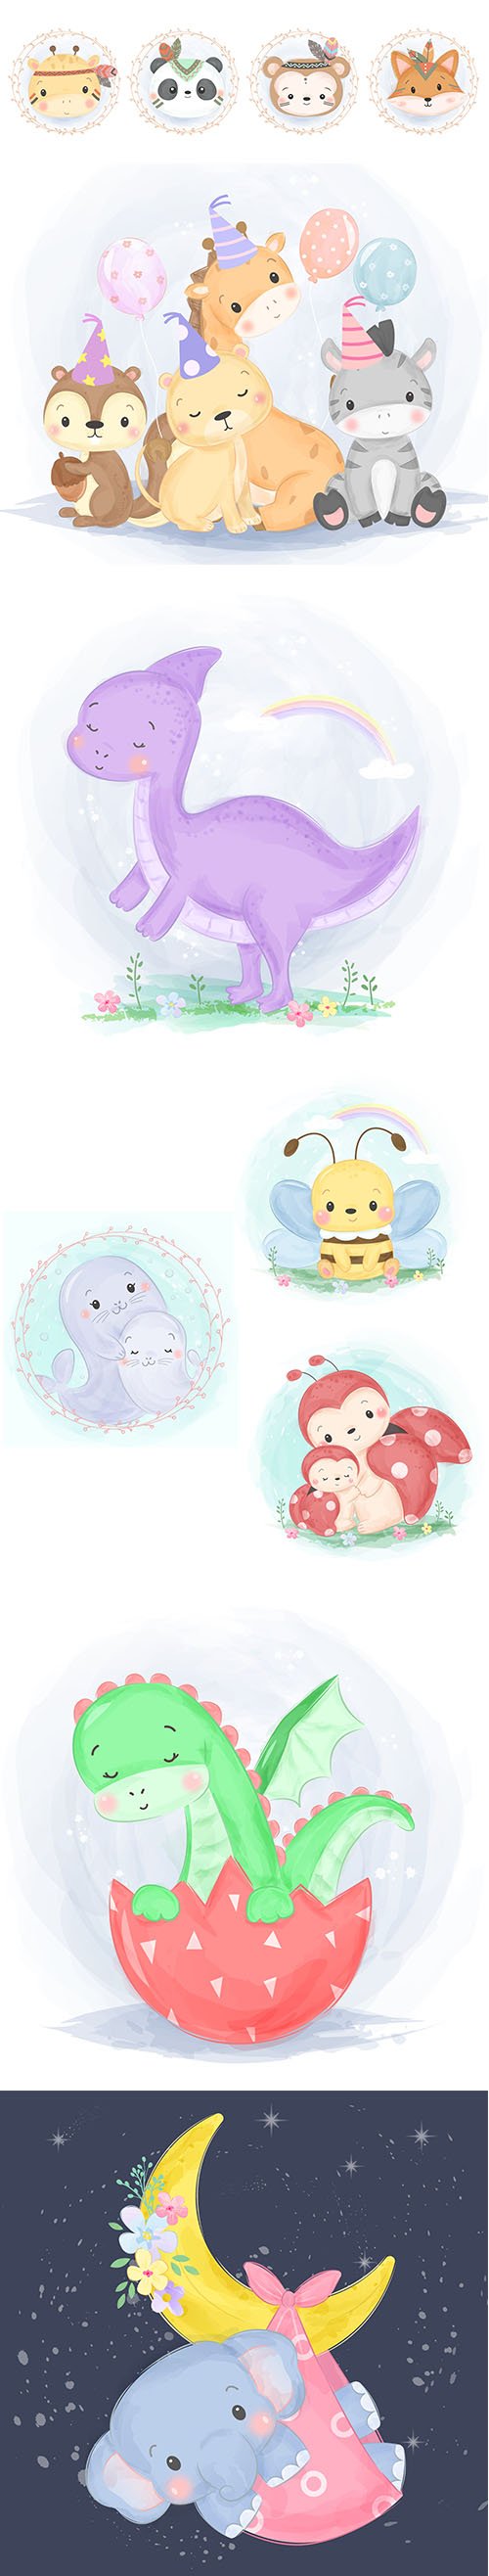 Adorable Baby Watercolor Illustrations